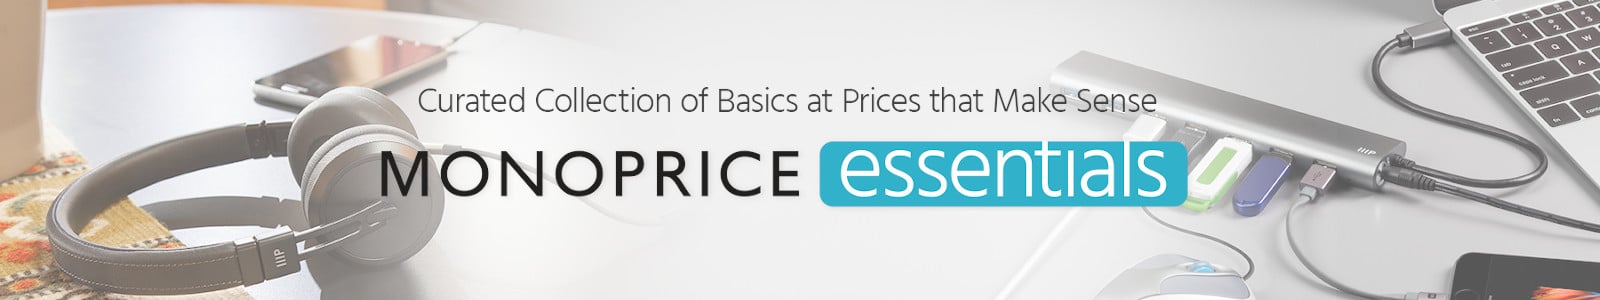 Curated Collection of Basics at Prices that Make Sense, Monoprice Essentials.